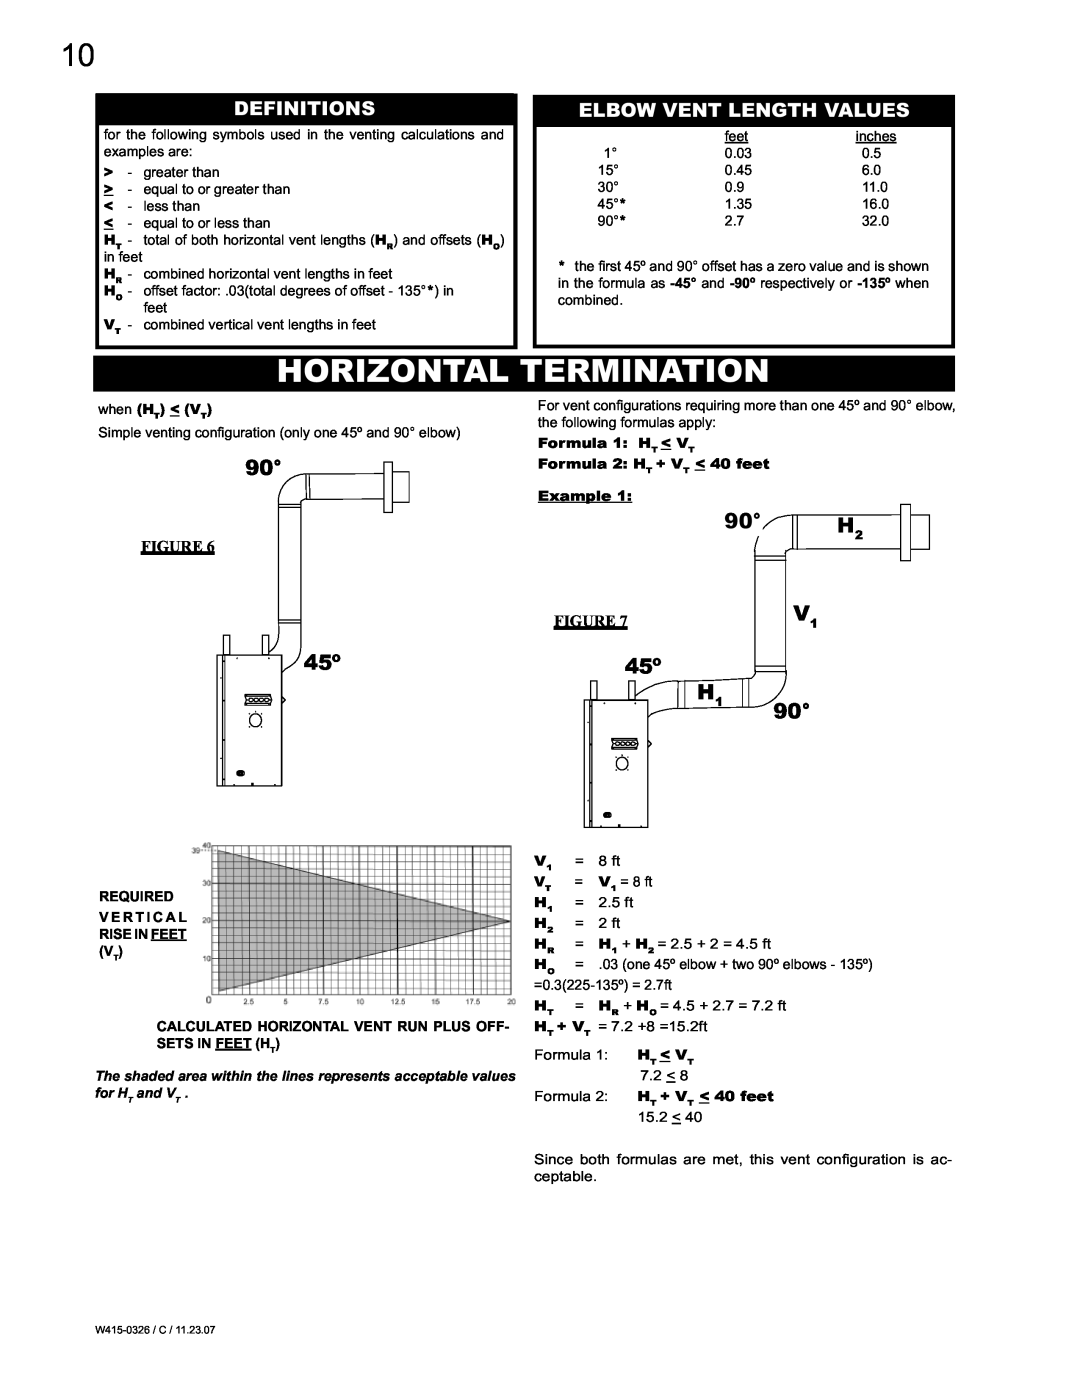 Napoleon Fireplaces BGD48N, BGD48P manual Horizontal Termination, 90 H2, 45º H1, Definitions, Elbow Vent Length Values 